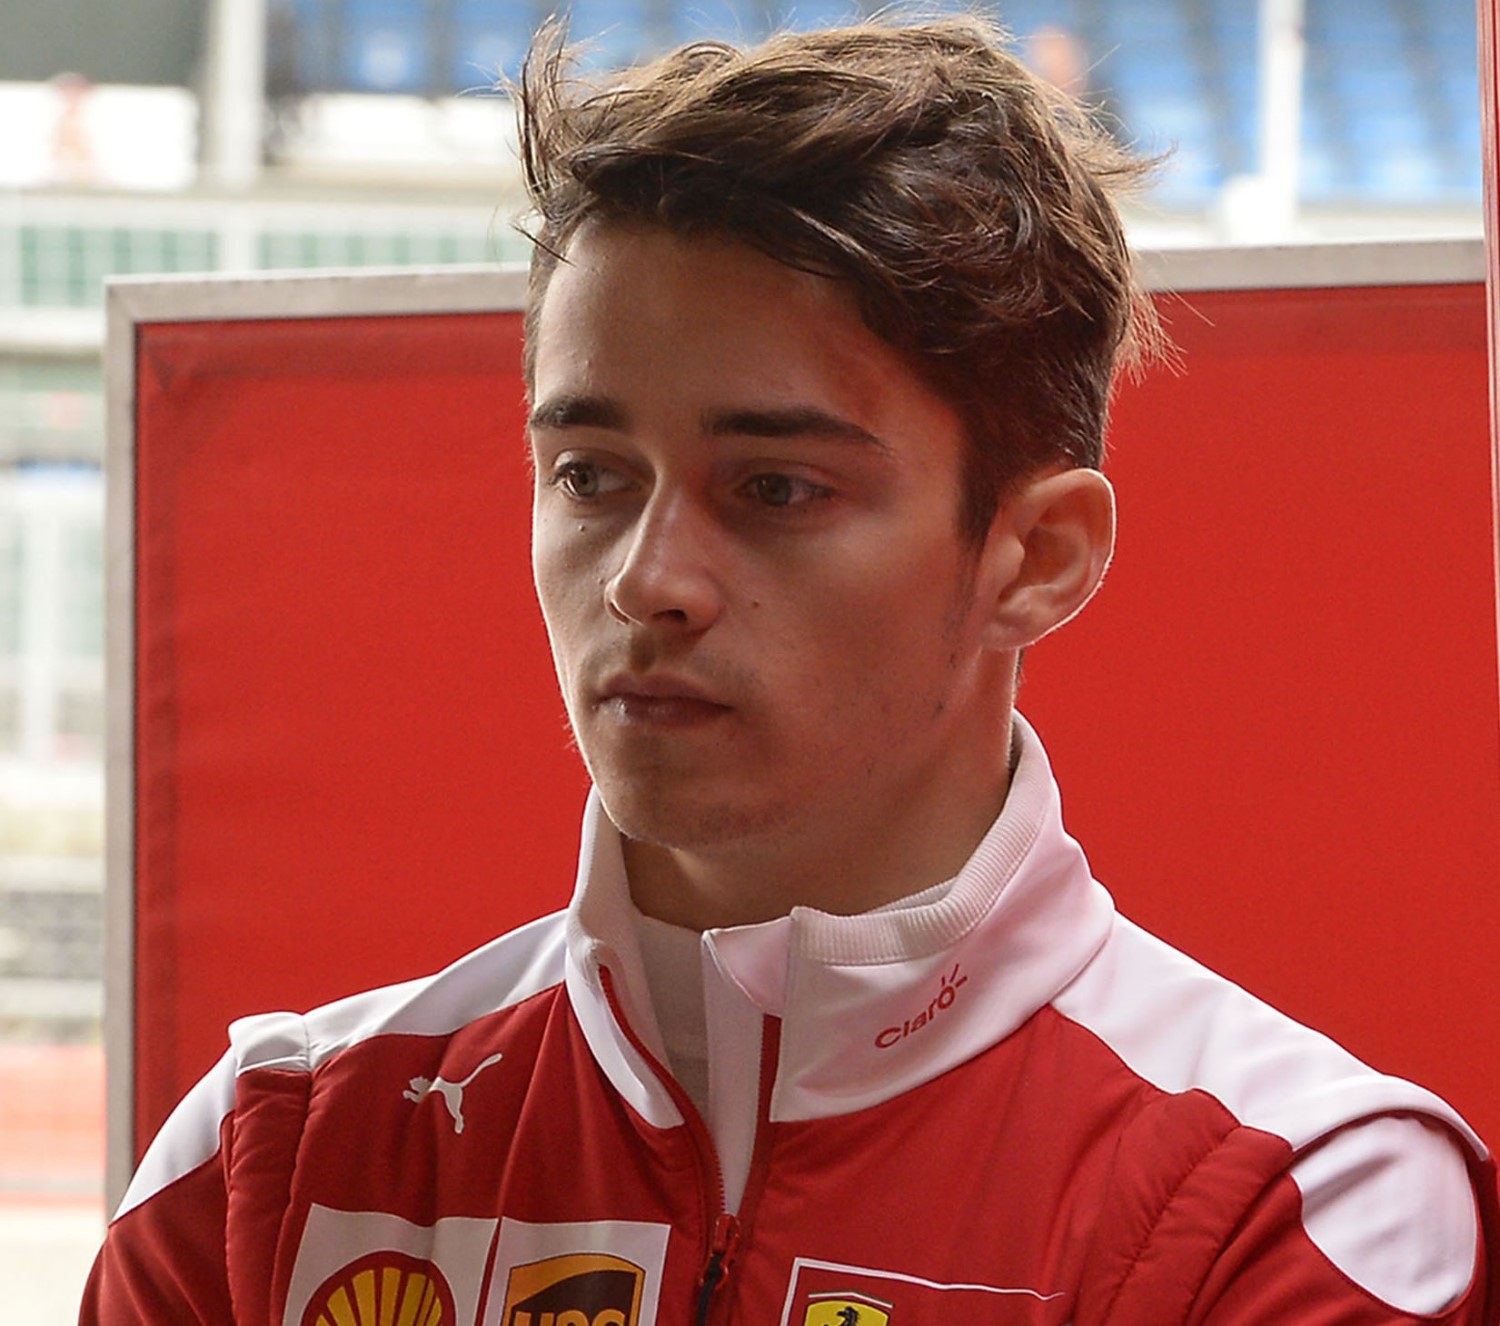 Charles Leclerc, has check, will drive